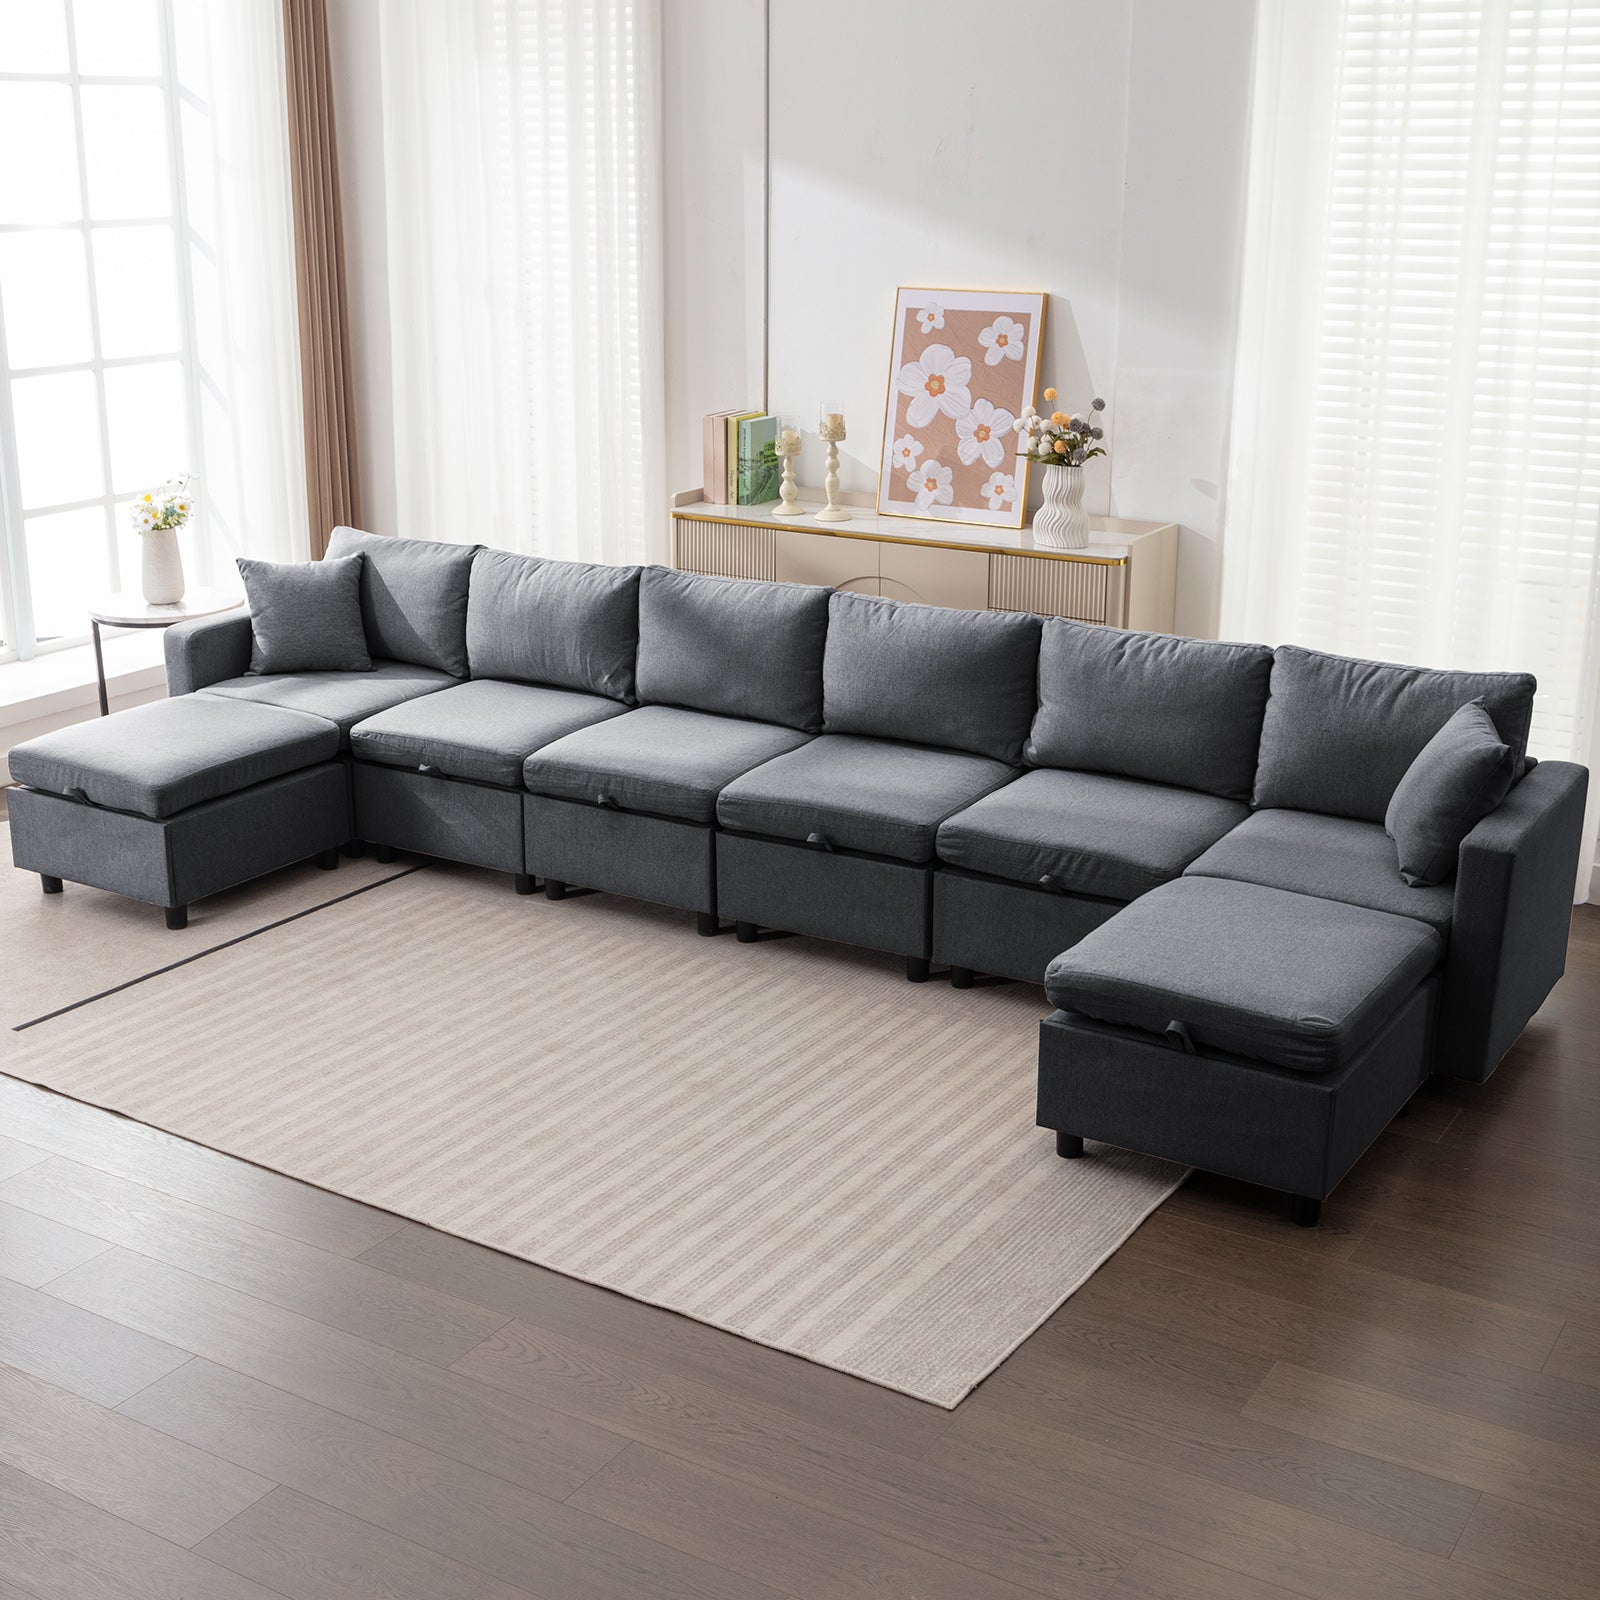 Cecer Sectional Sofa Couch for Living Room, Modern Seat Couches/ Storage Space/Memory Foam Cushions/Linen Fabric/Soft Sponge Seaters/Easy Assembly